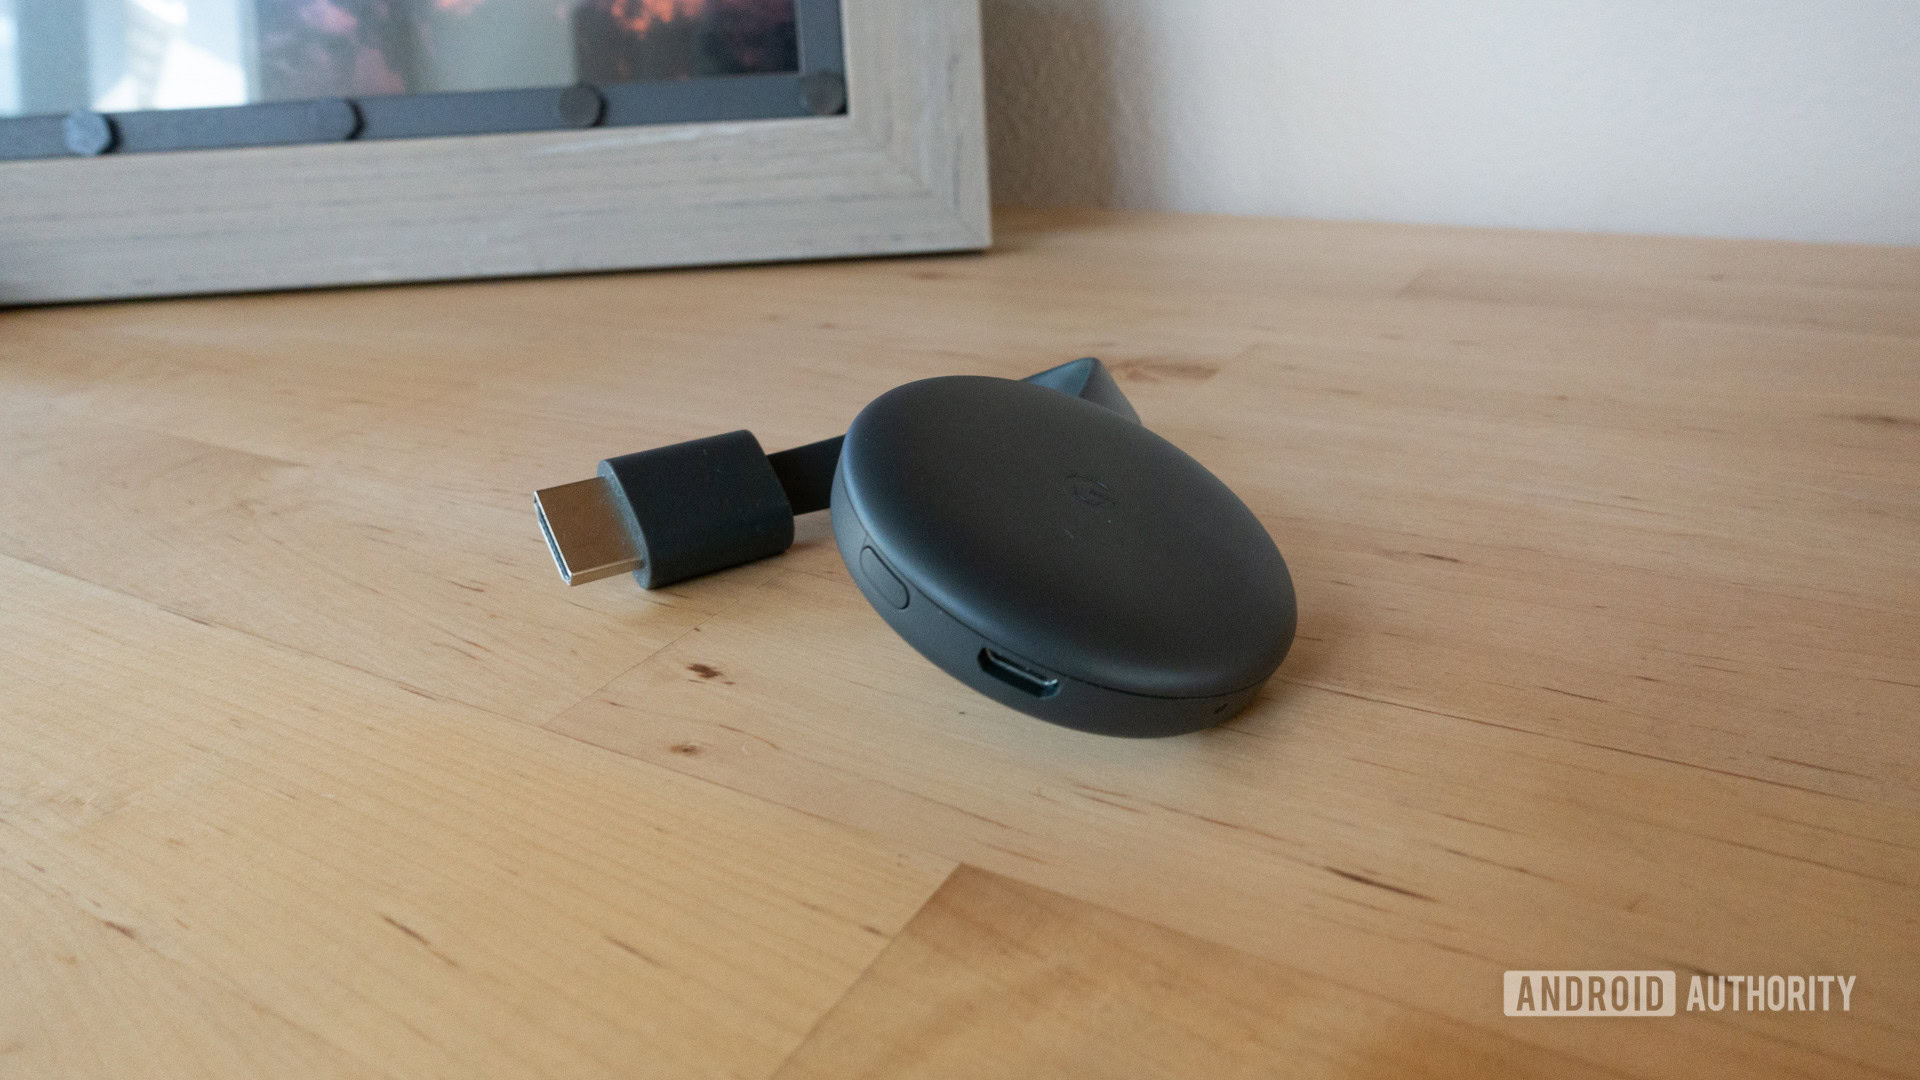 Add a Chromecast to speaker group using Home app